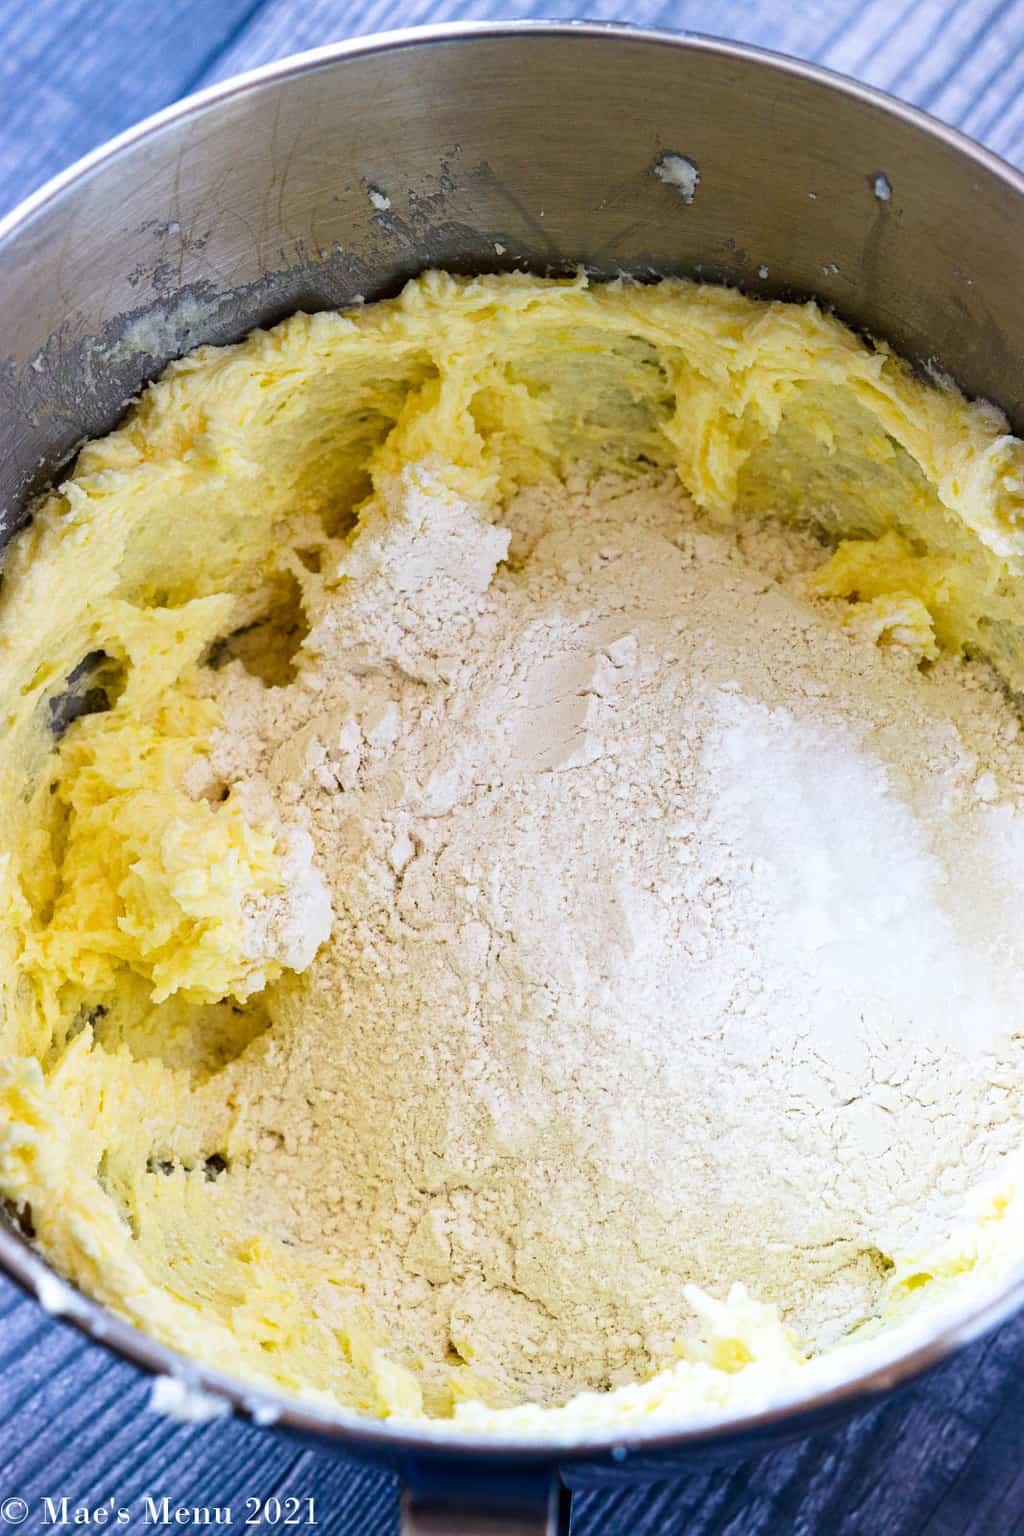 A mizing bowl of creamed butter, flour, and baking soda